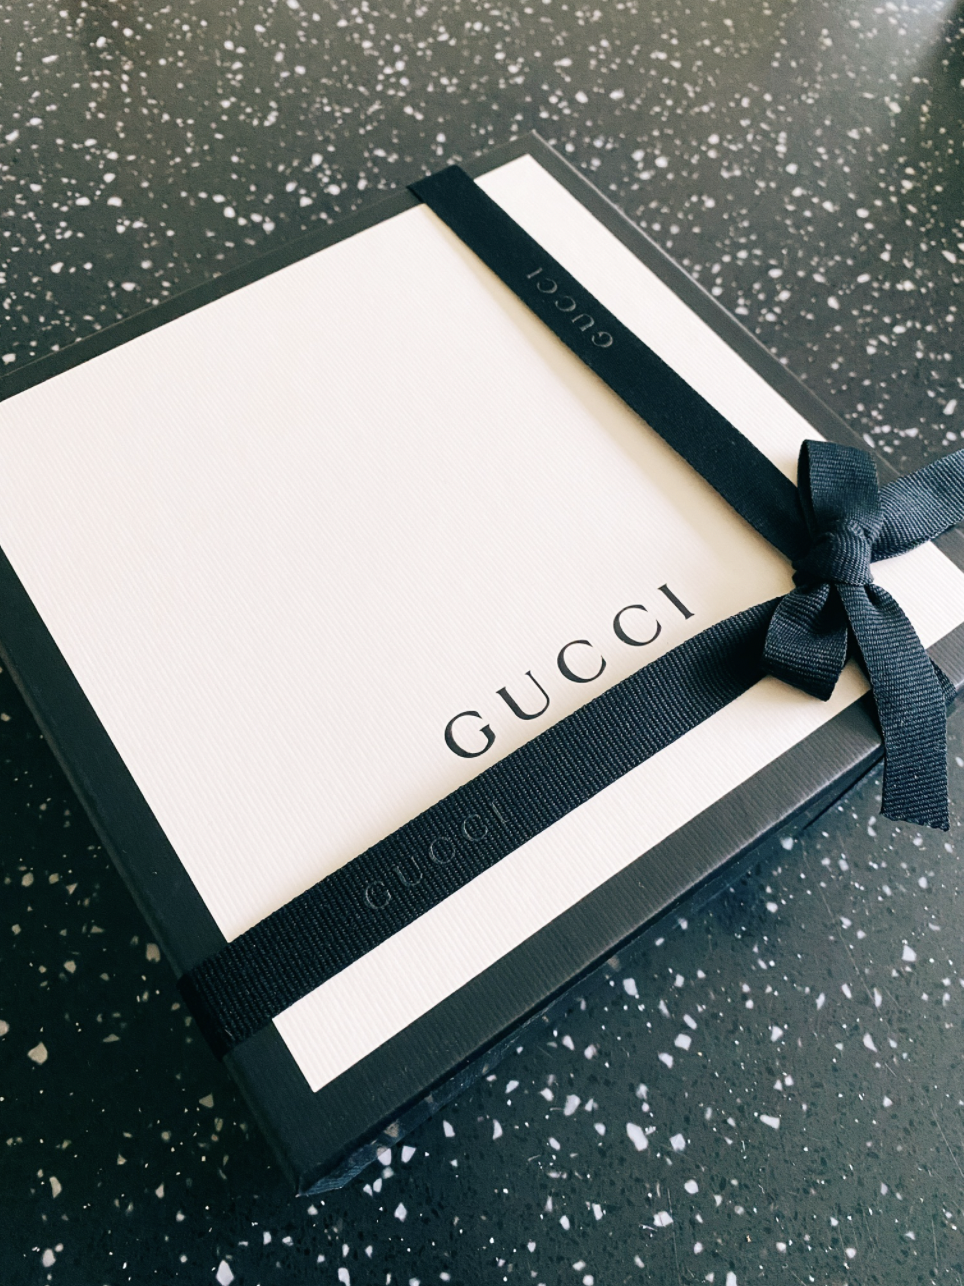 An exciting purchase from Gucci in 2020